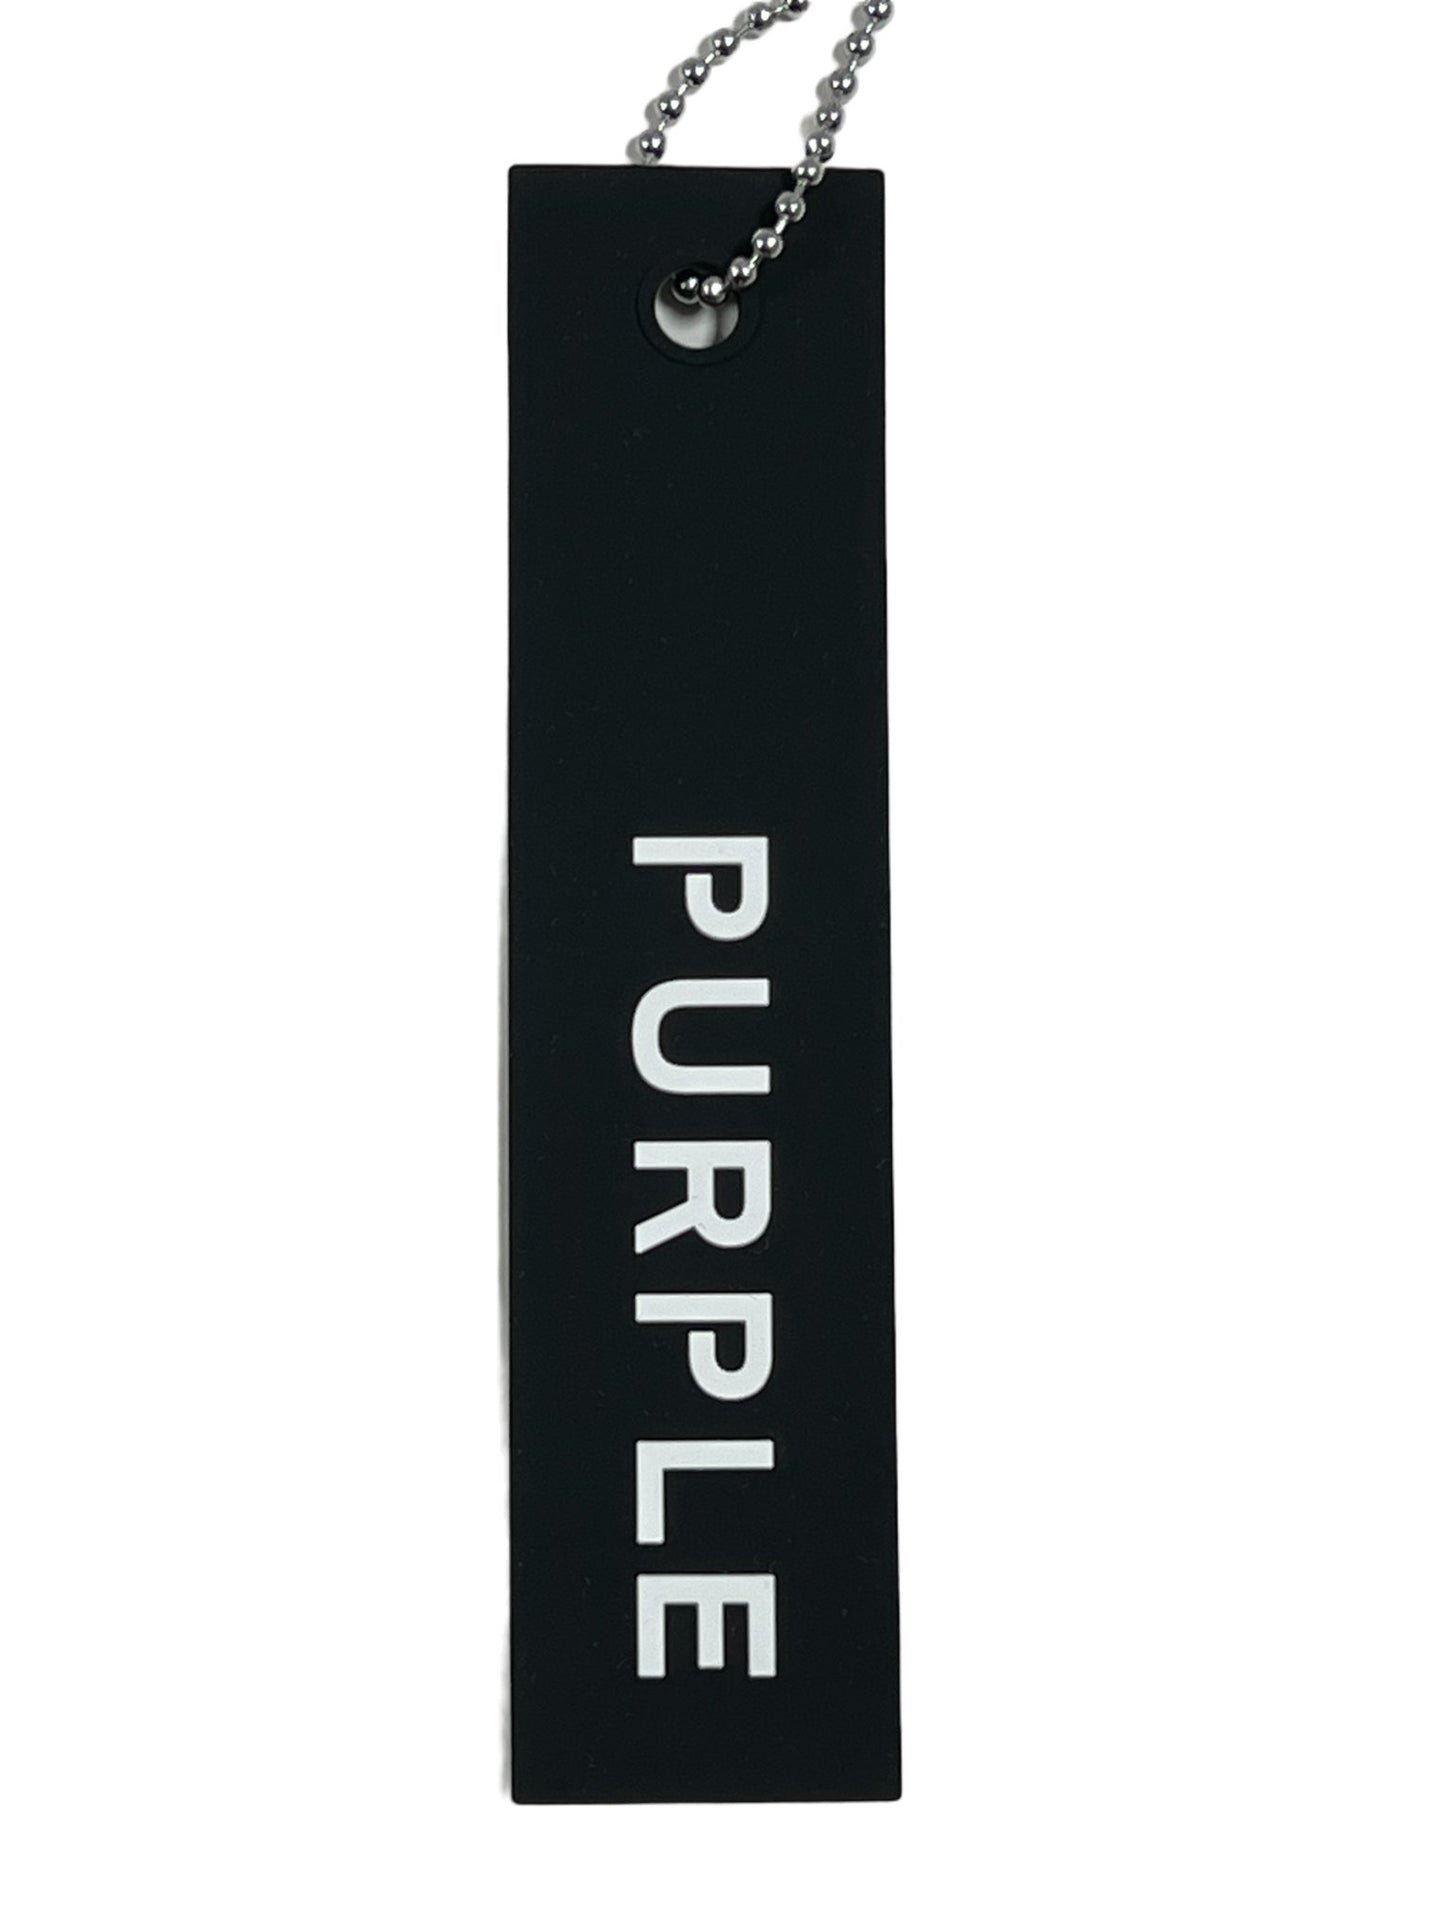 A black rectangular tag with the word "PURPLE" printed in white uppercase letters, attached to a ball chain, adds a touch of unique design to your outfit. This detail pairs perfectly with PURPLE BRAND P504-PBBH ALL ROUND SHORT AOP featuring a vibrant print.